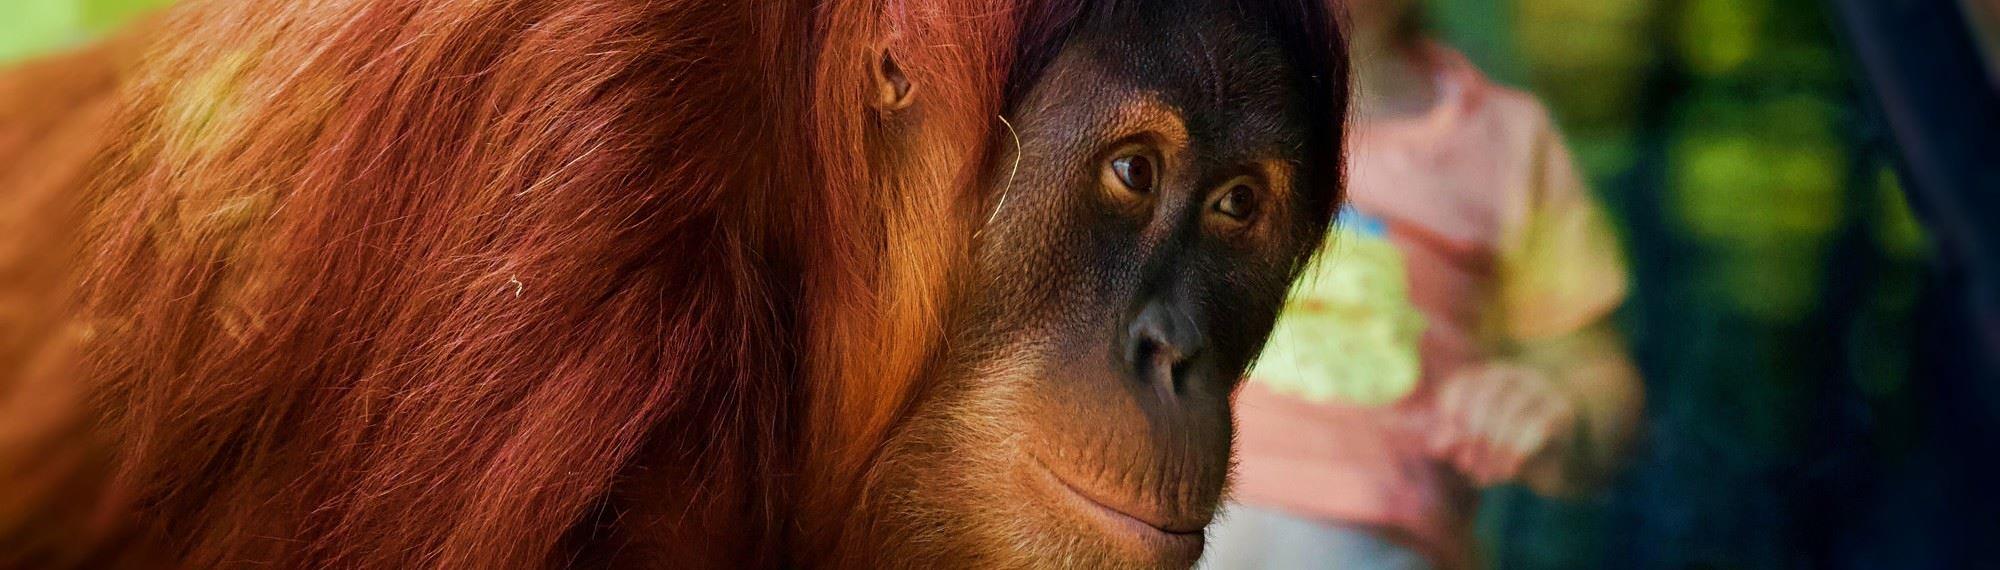 Side picture of Sumatran Orang-utan with small child viewing in the background.